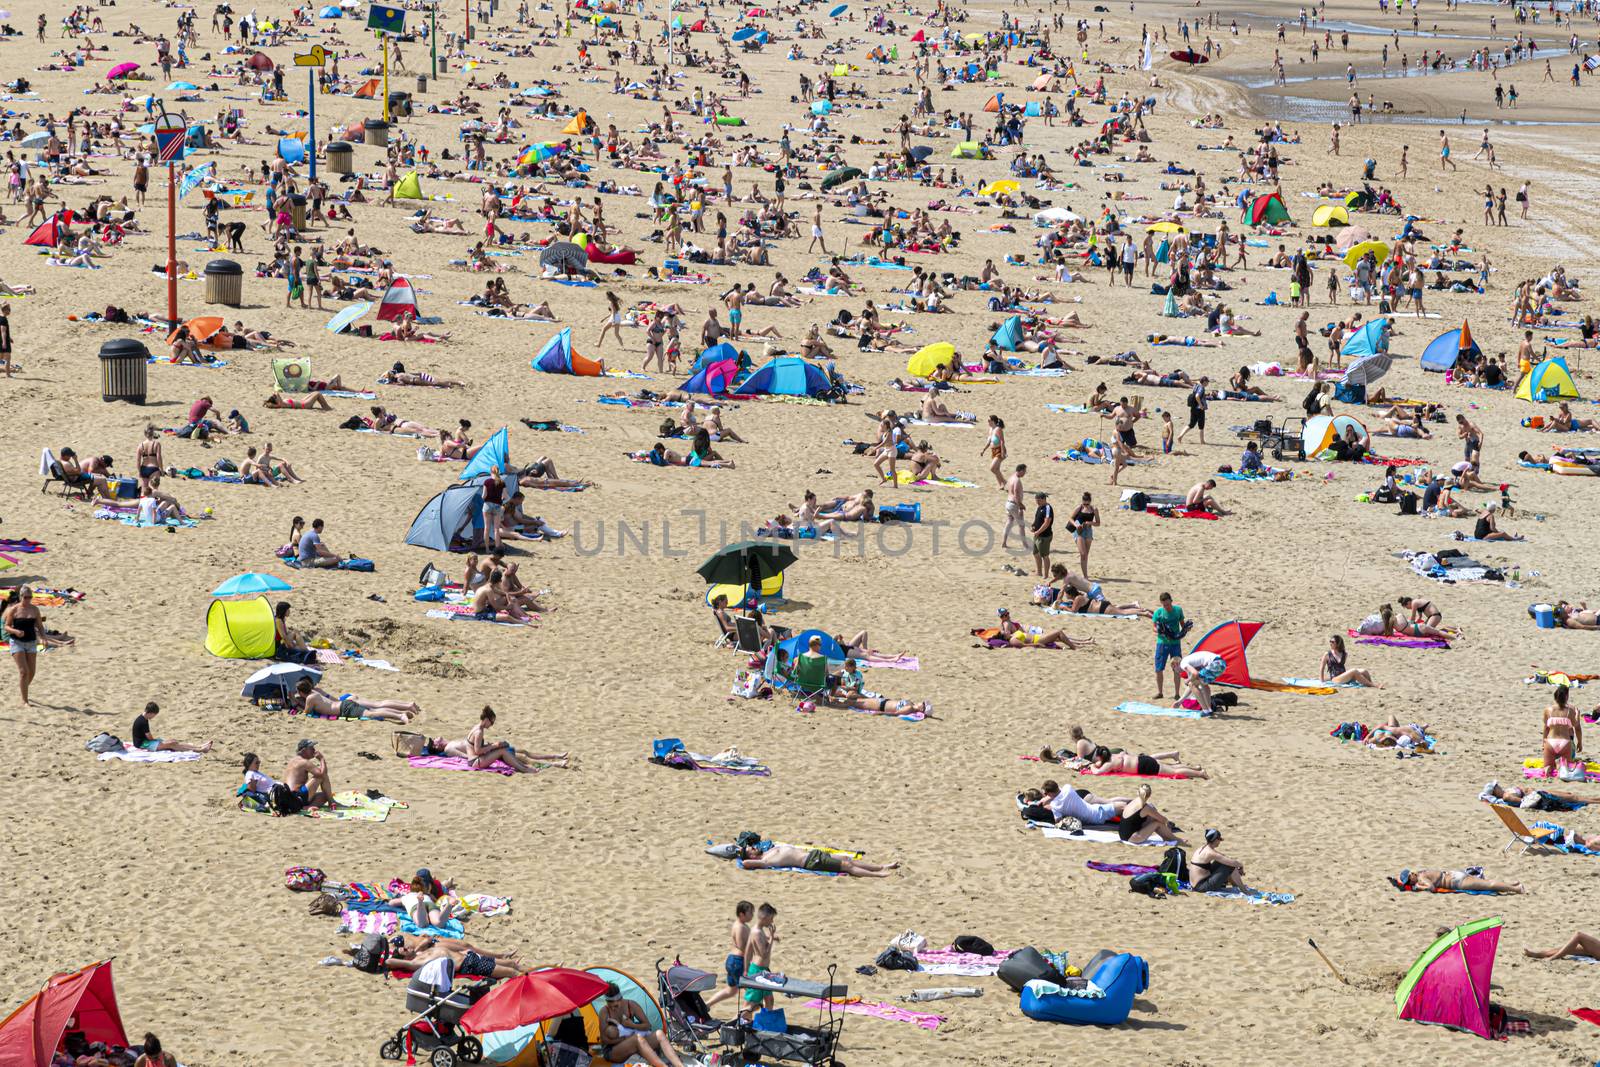 Aerial view of the beach of The Hague with crowded people enjoying take sun bath during the hot and sunny day before the summer.